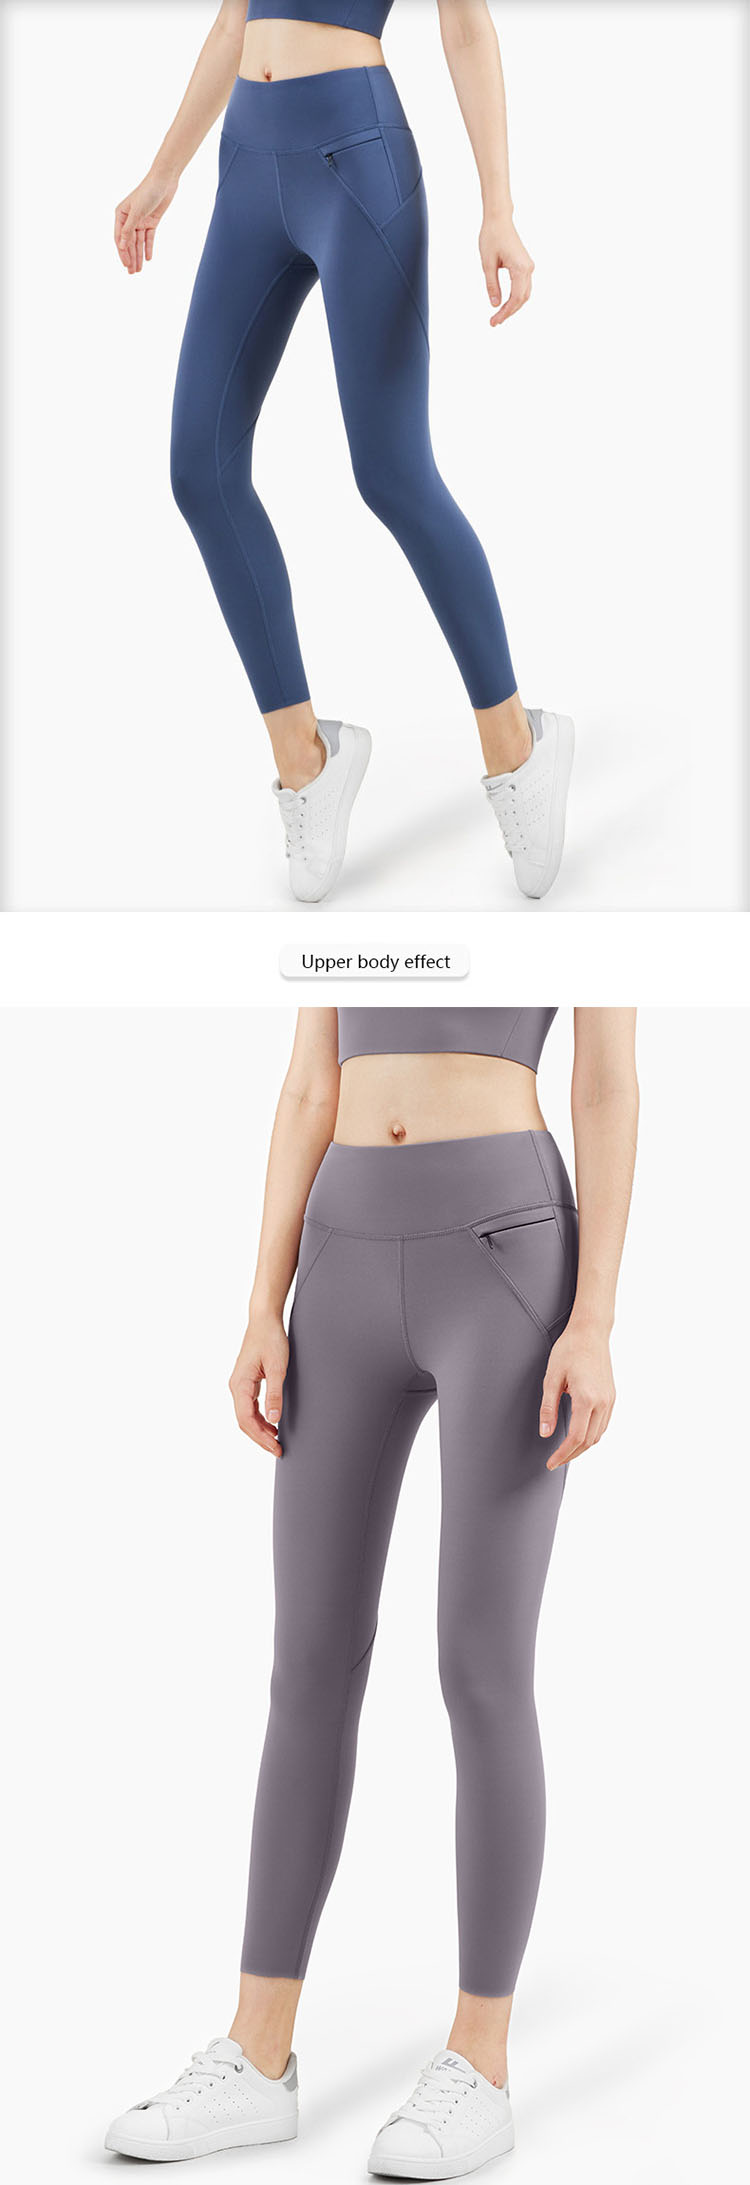 The super tight pants design can better modify the waist curve and show the feminine waist